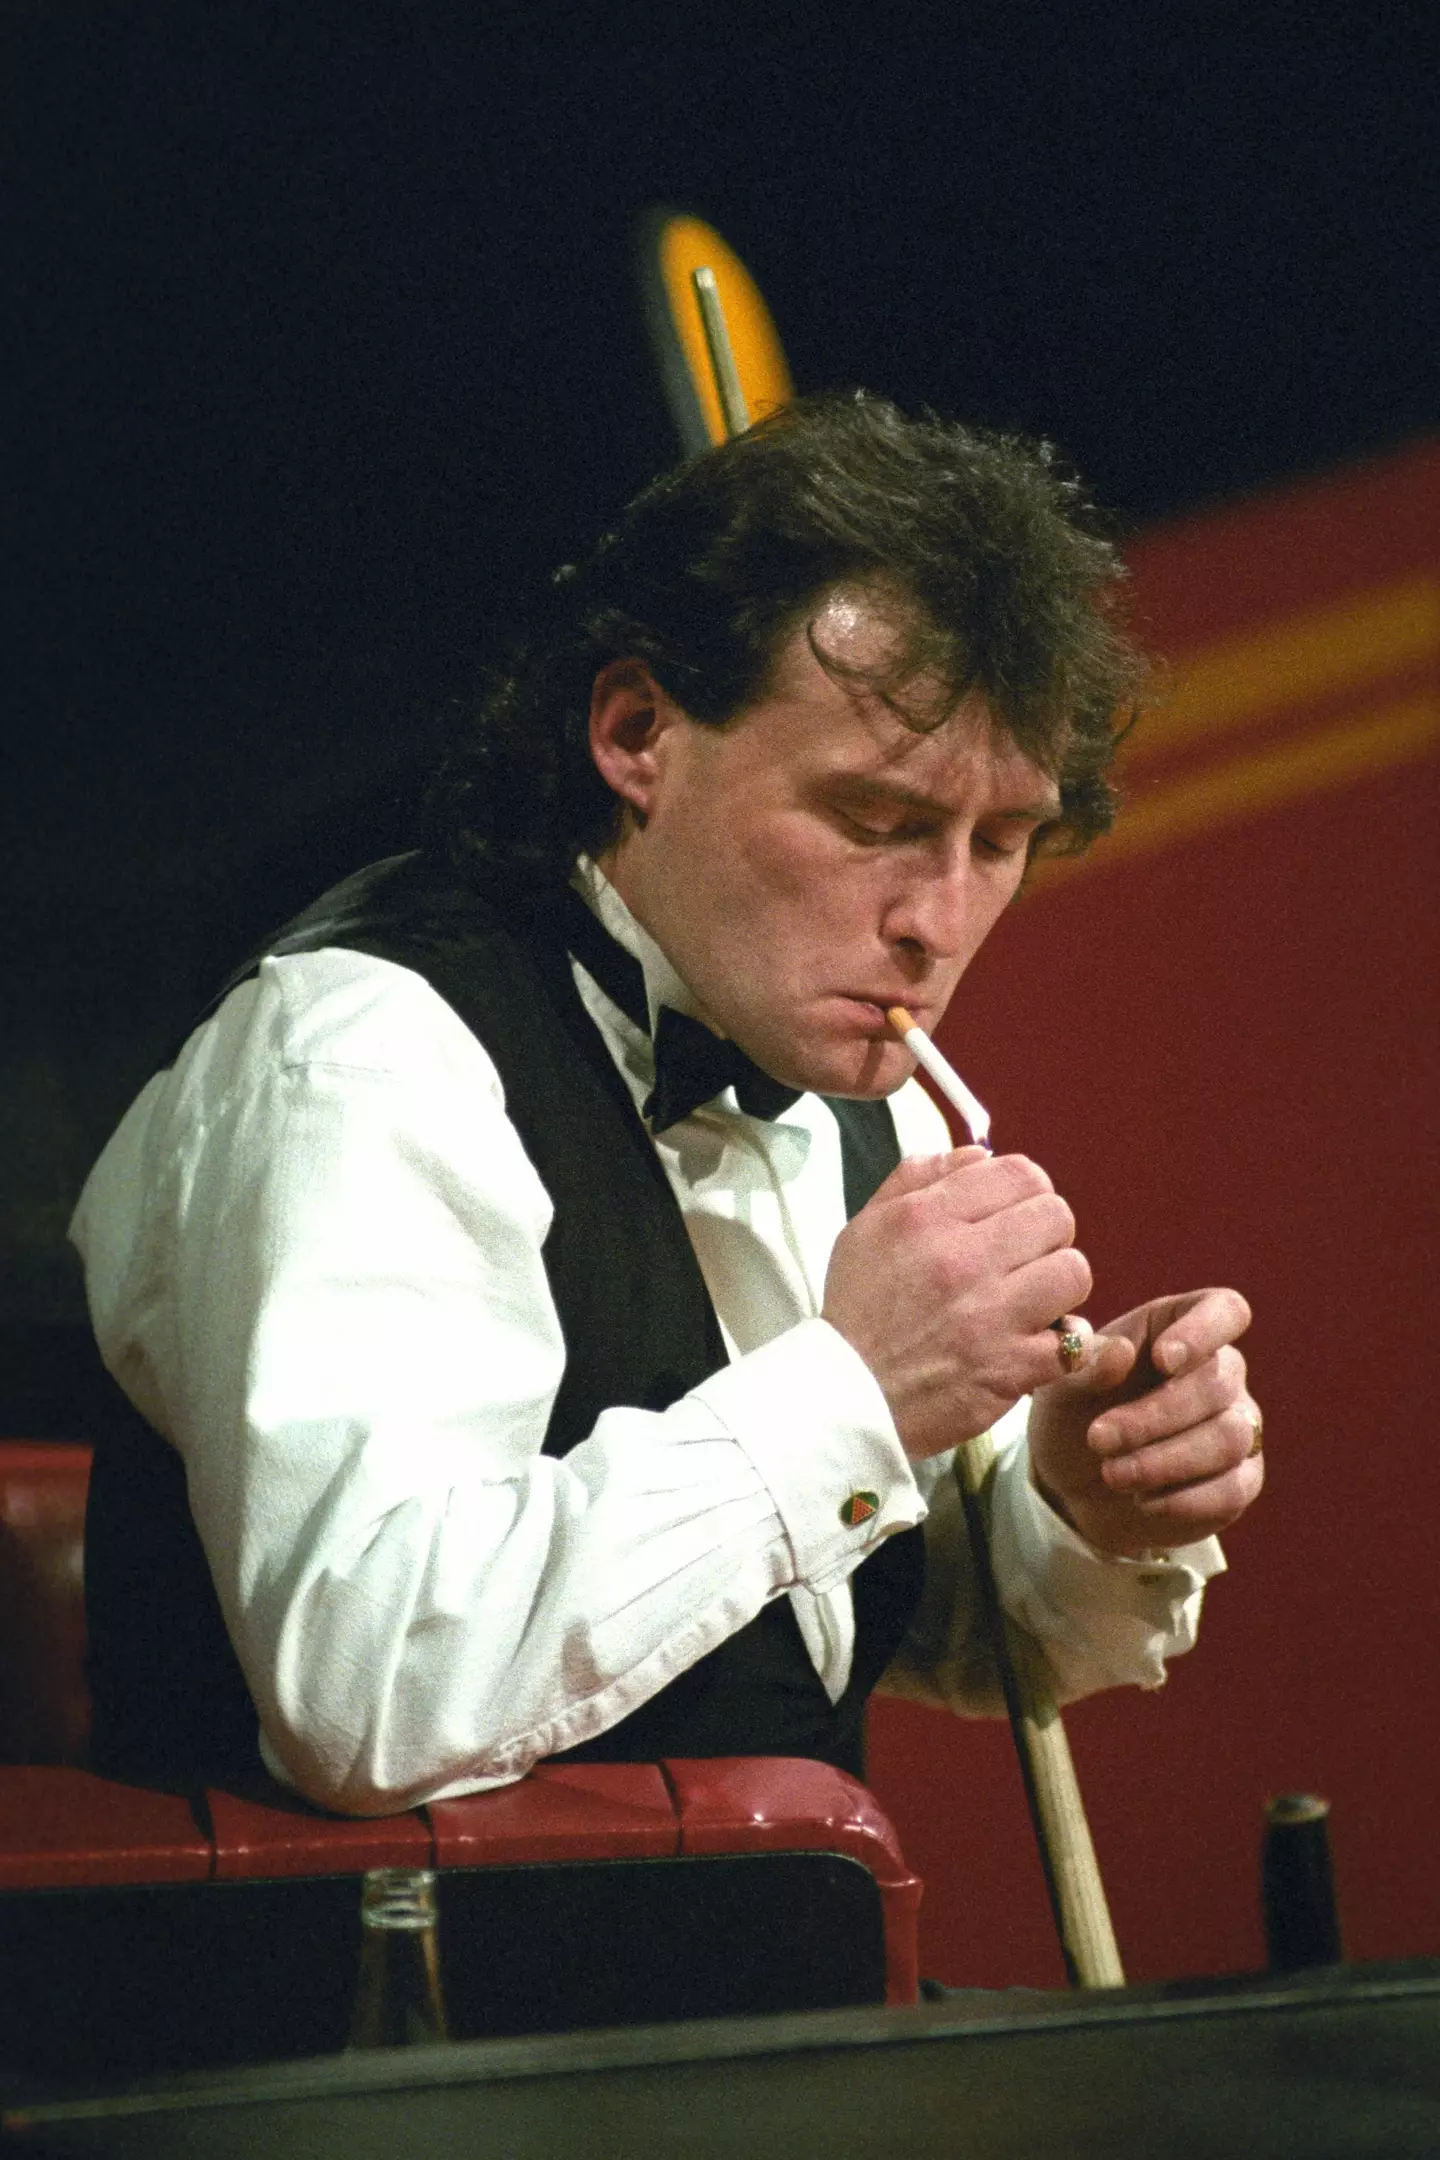 The snooker legend has been open about his battle with drink and drugs.